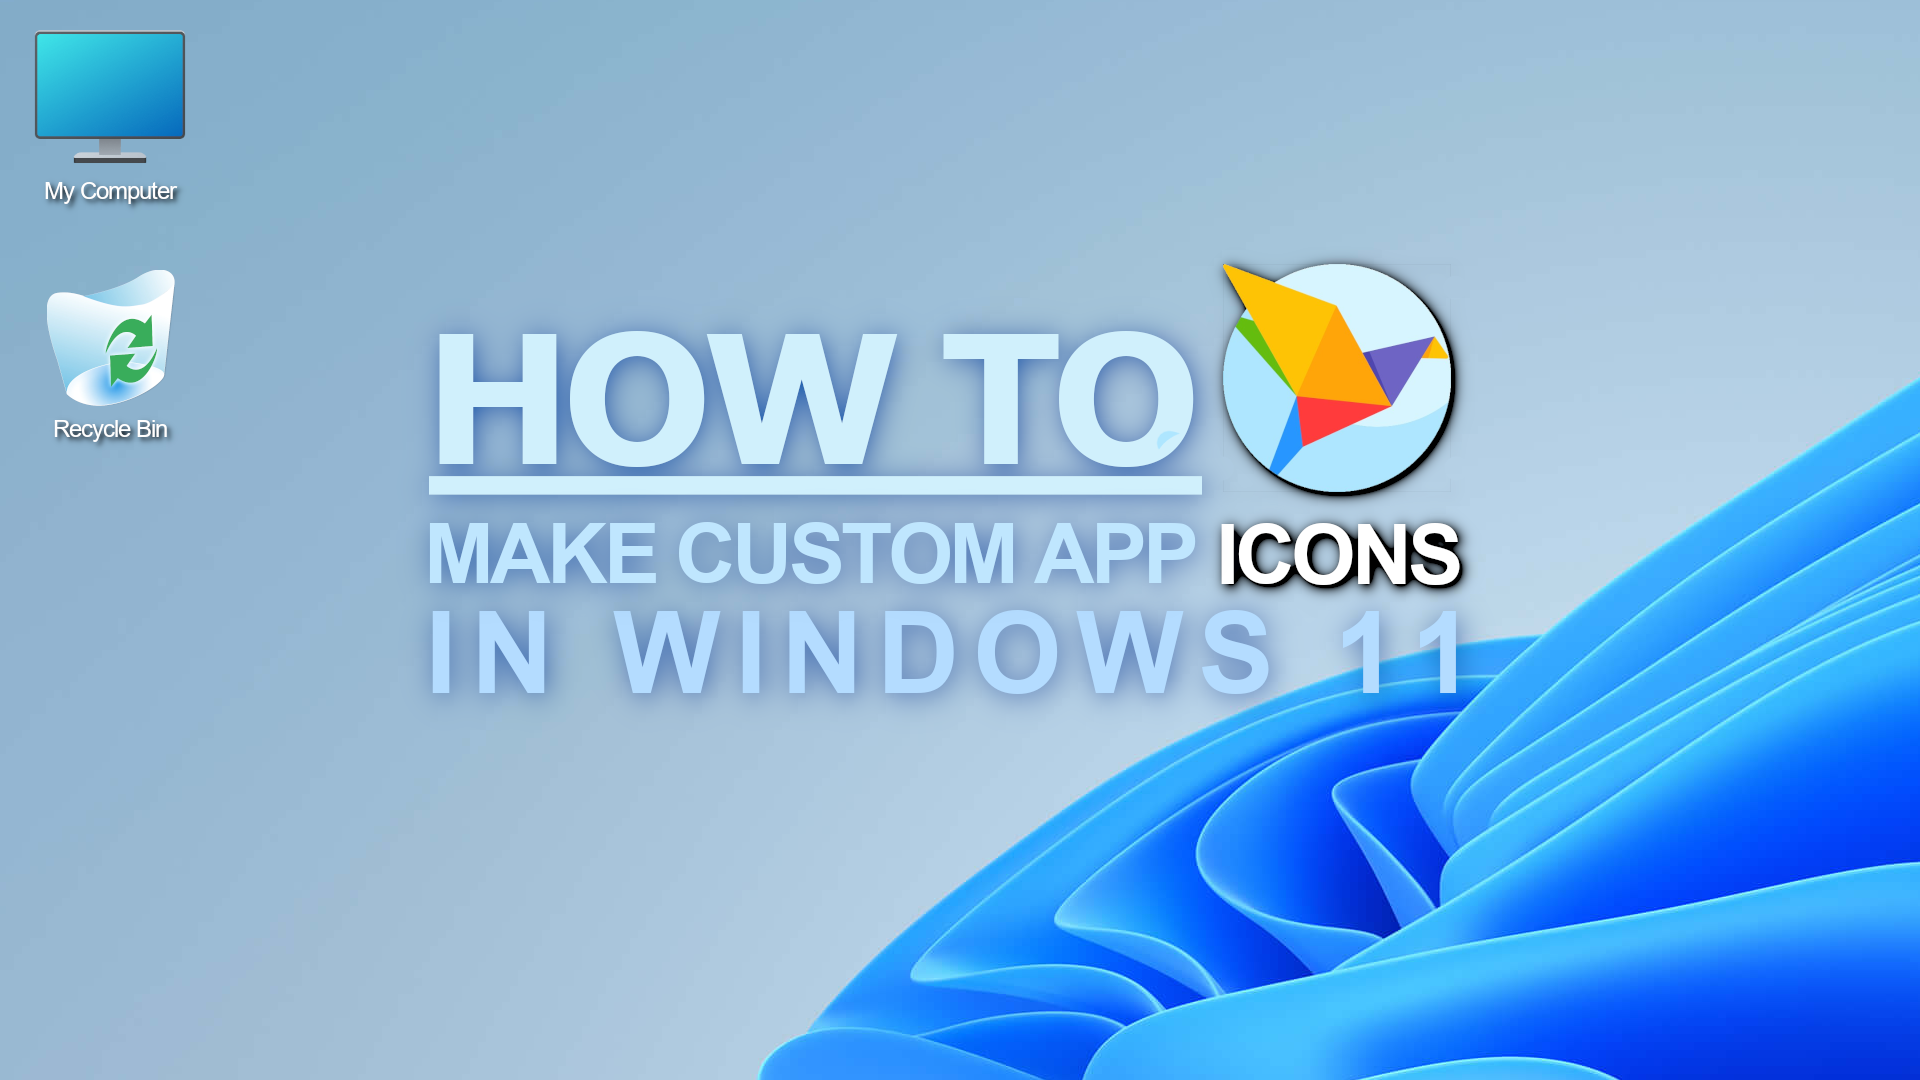 Customize Your Computer: Windows 11 Apps